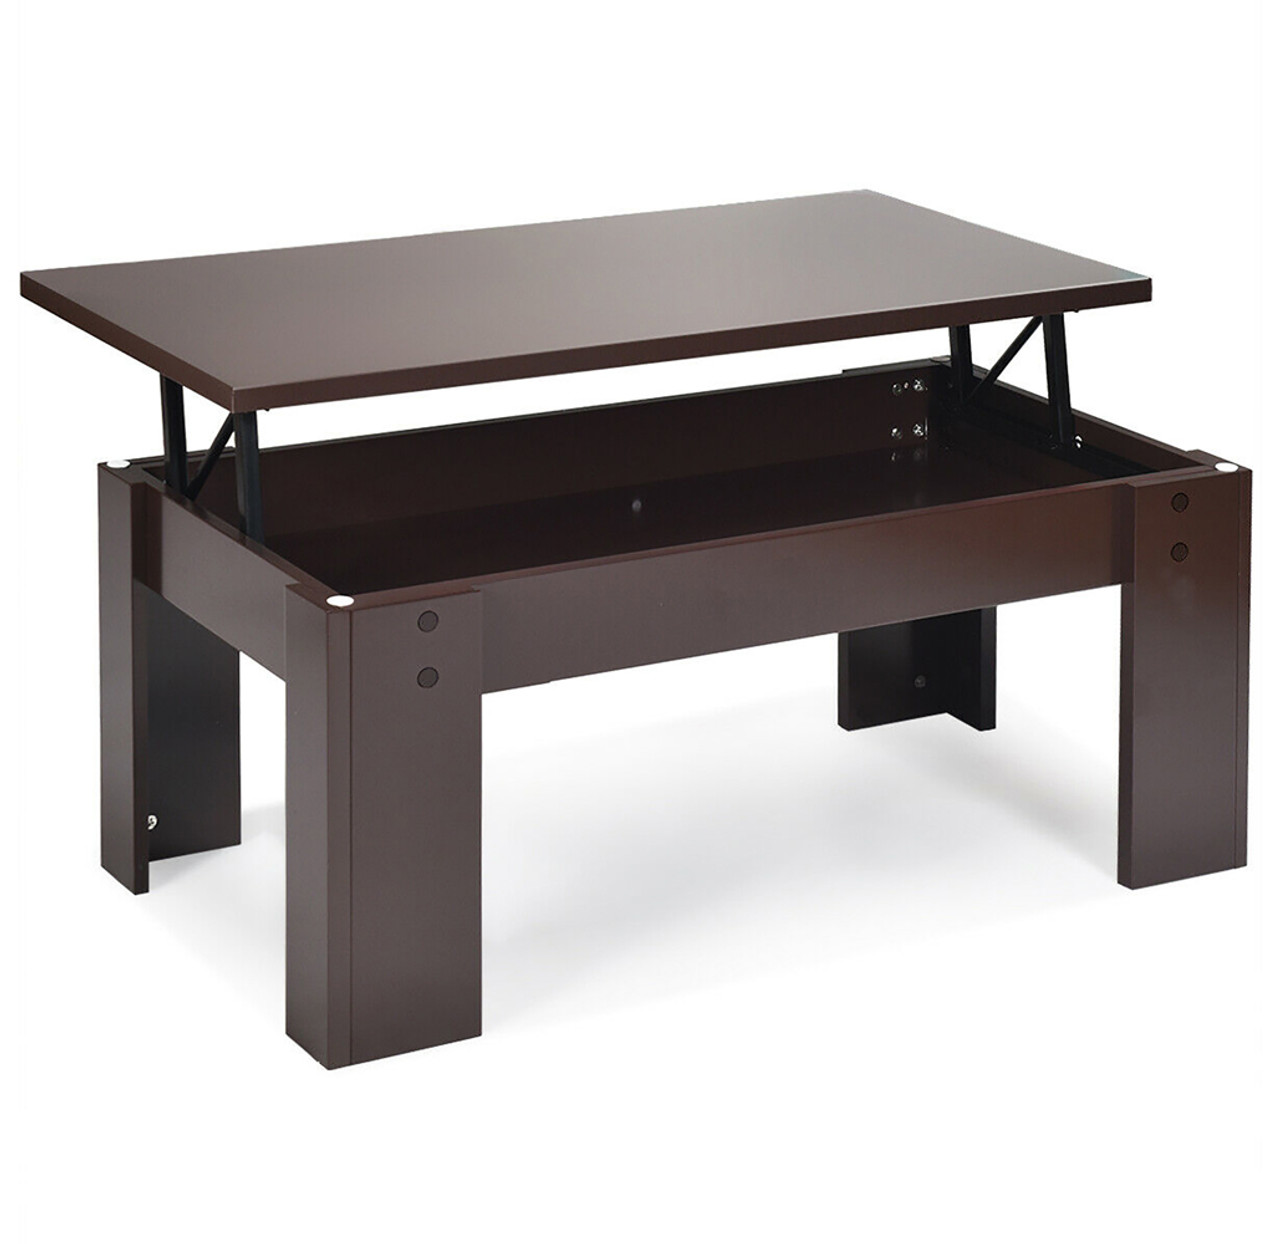 Modern Lift Top Hidden Compartment Coffee Table product image